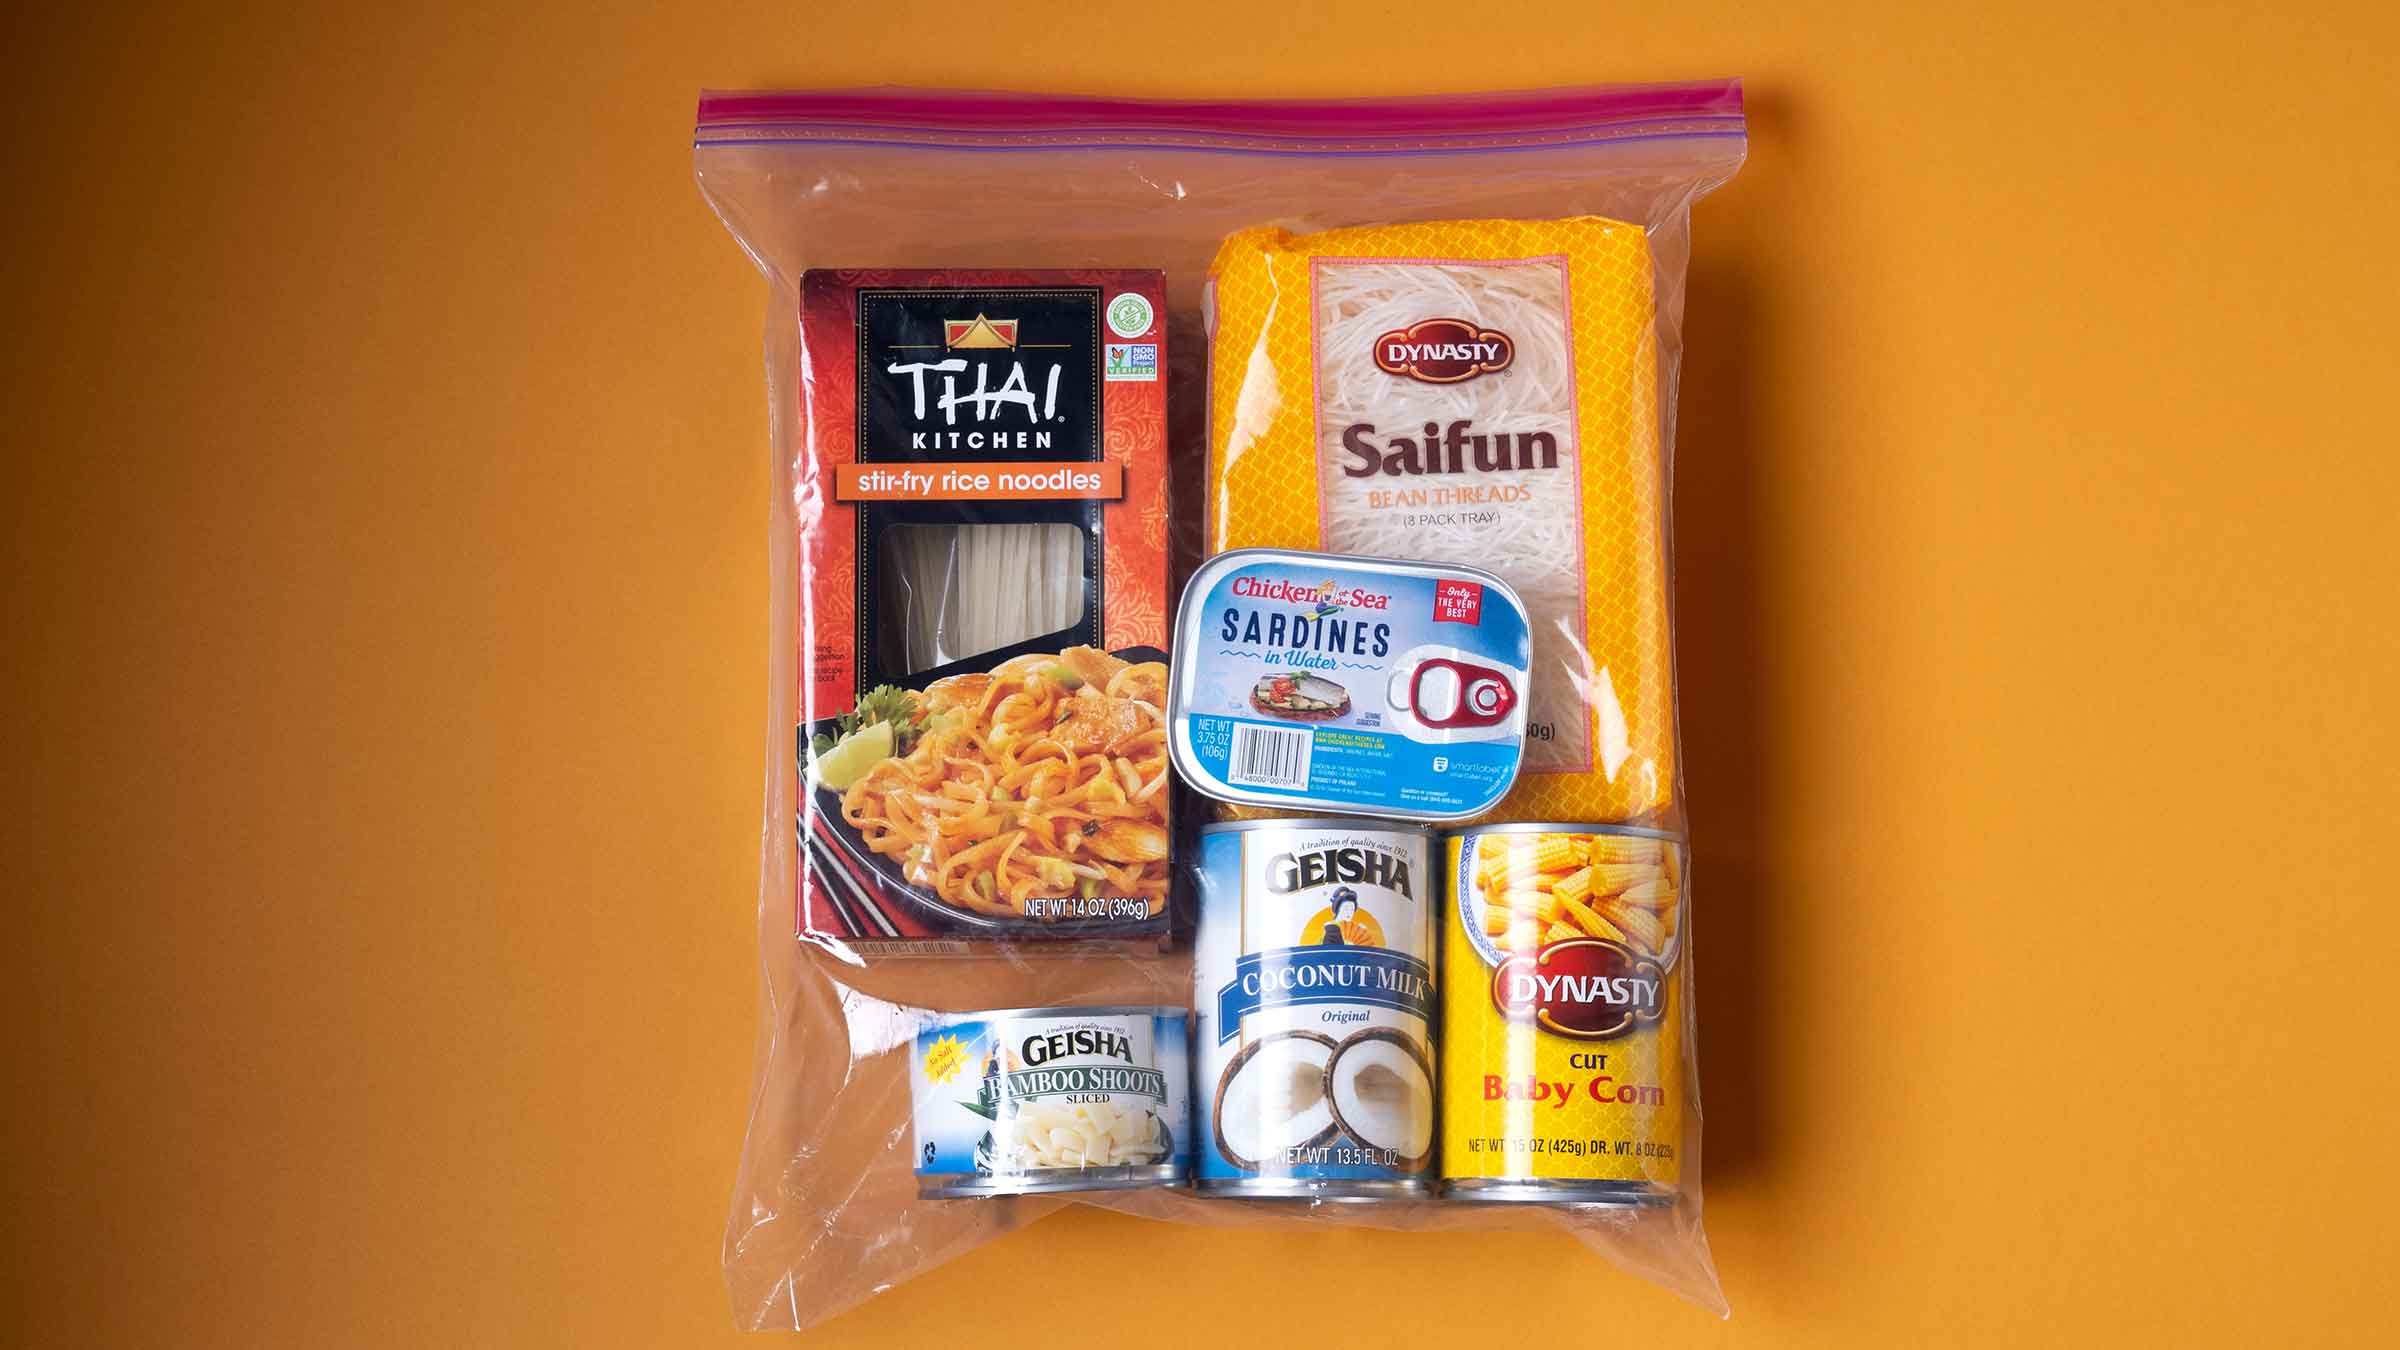 A Ziploc bag is filled with various food items that are staples in the eastern Asian diet